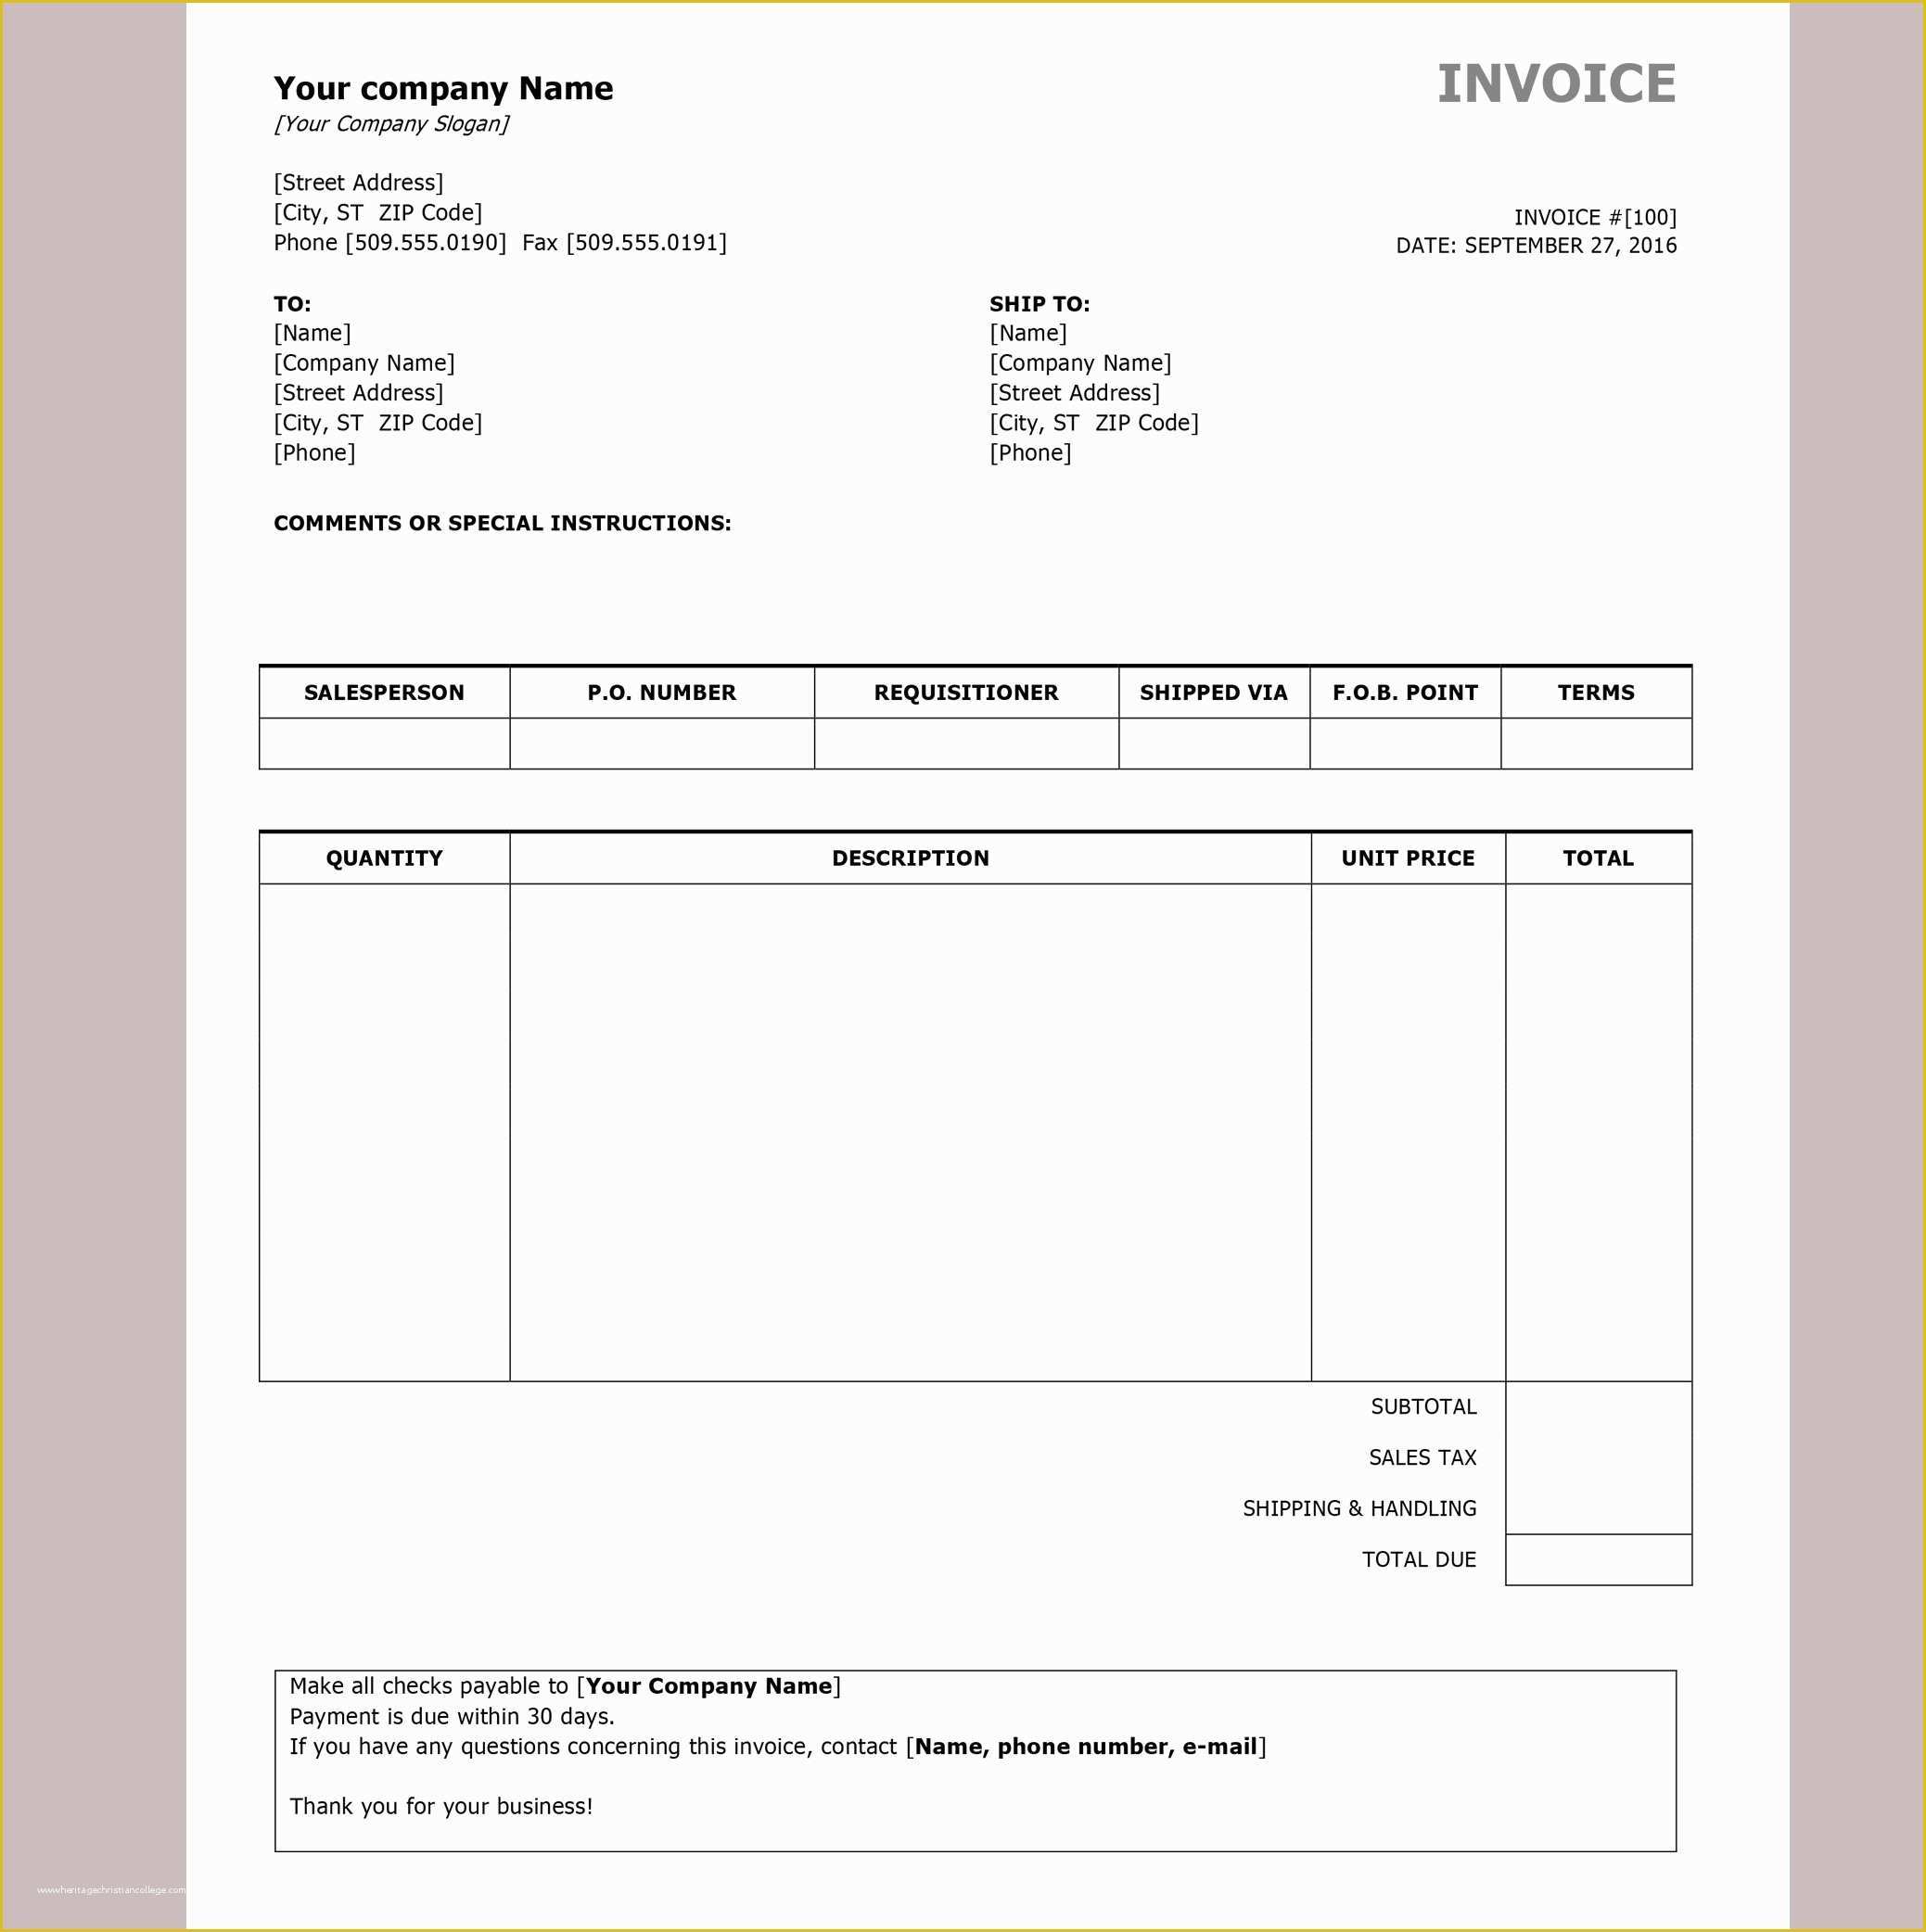 Free Invoice Template Word Of Free Invoice Templates by Invoiceberry the Grid System